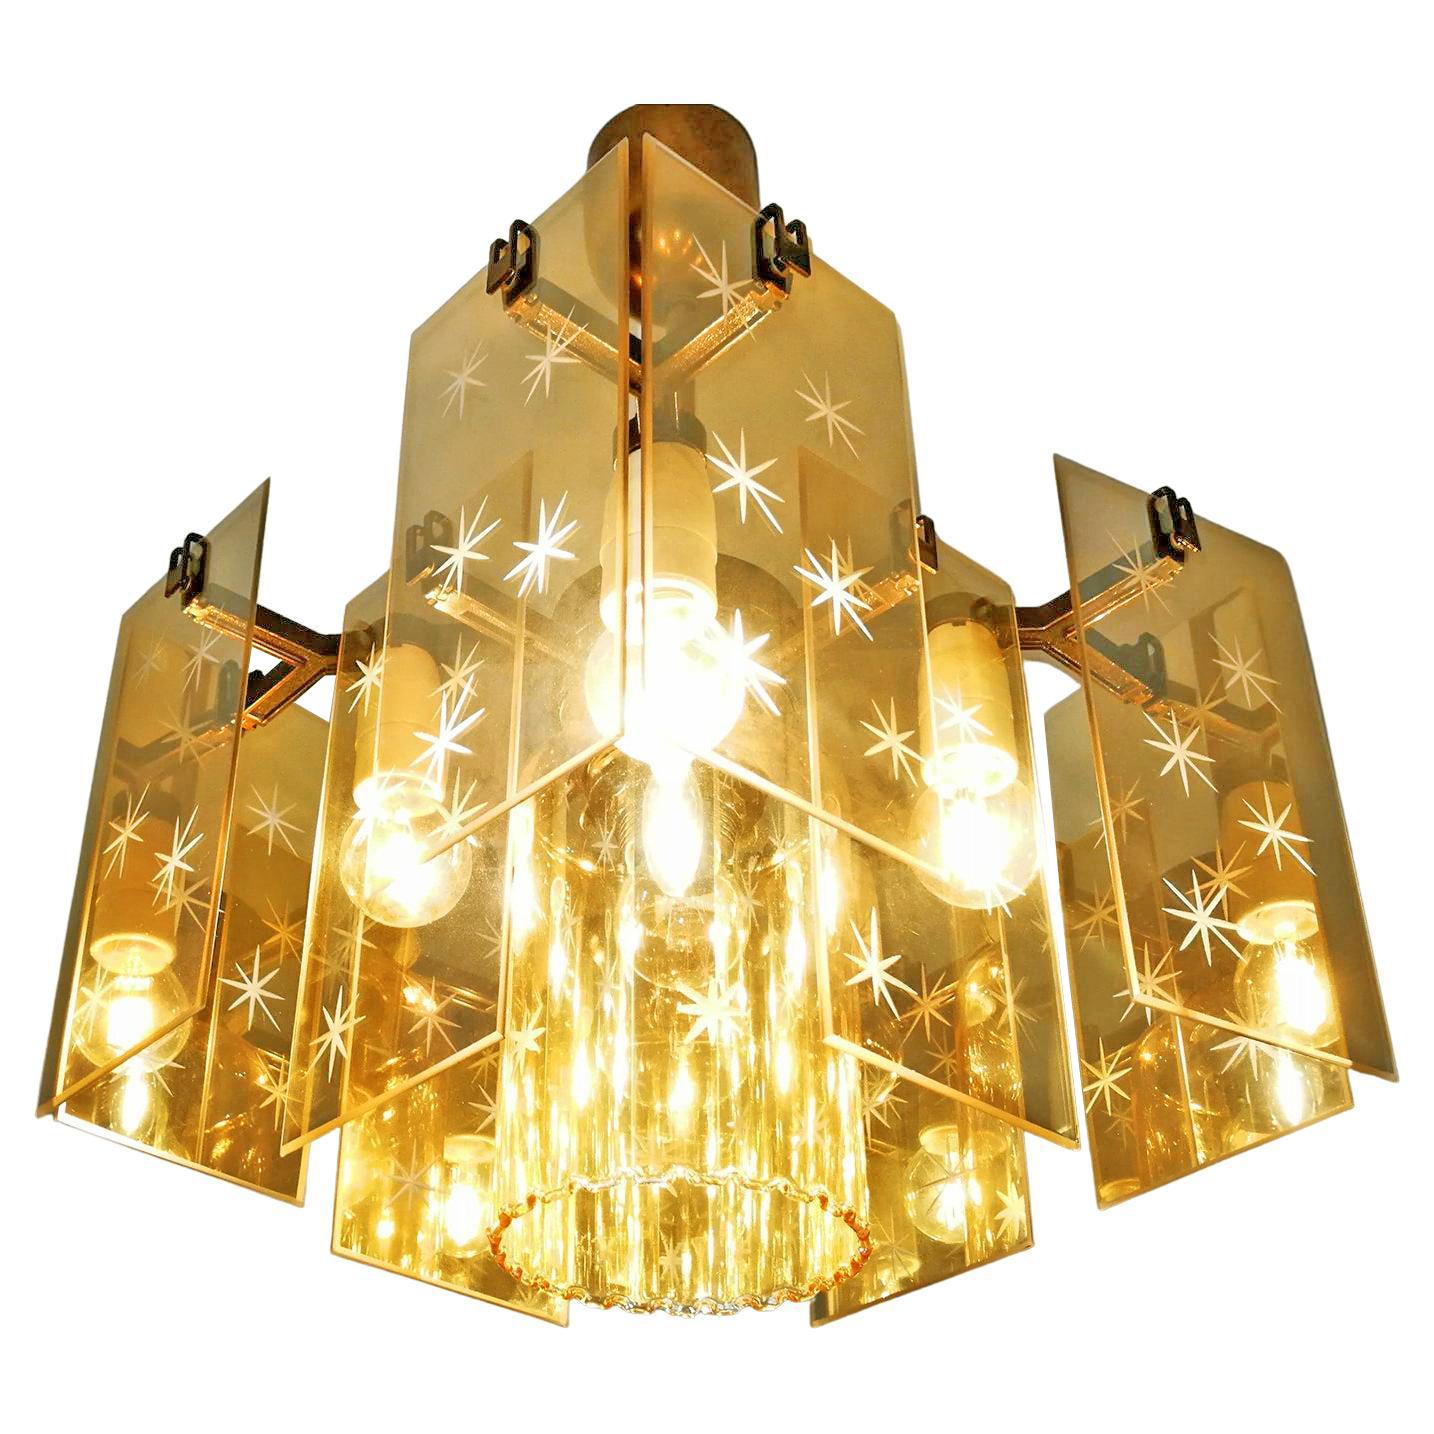 Italian Mid-Century Modern Smoked Amber Gold Cut Glass Fontana Style Chandelier For Sale 1